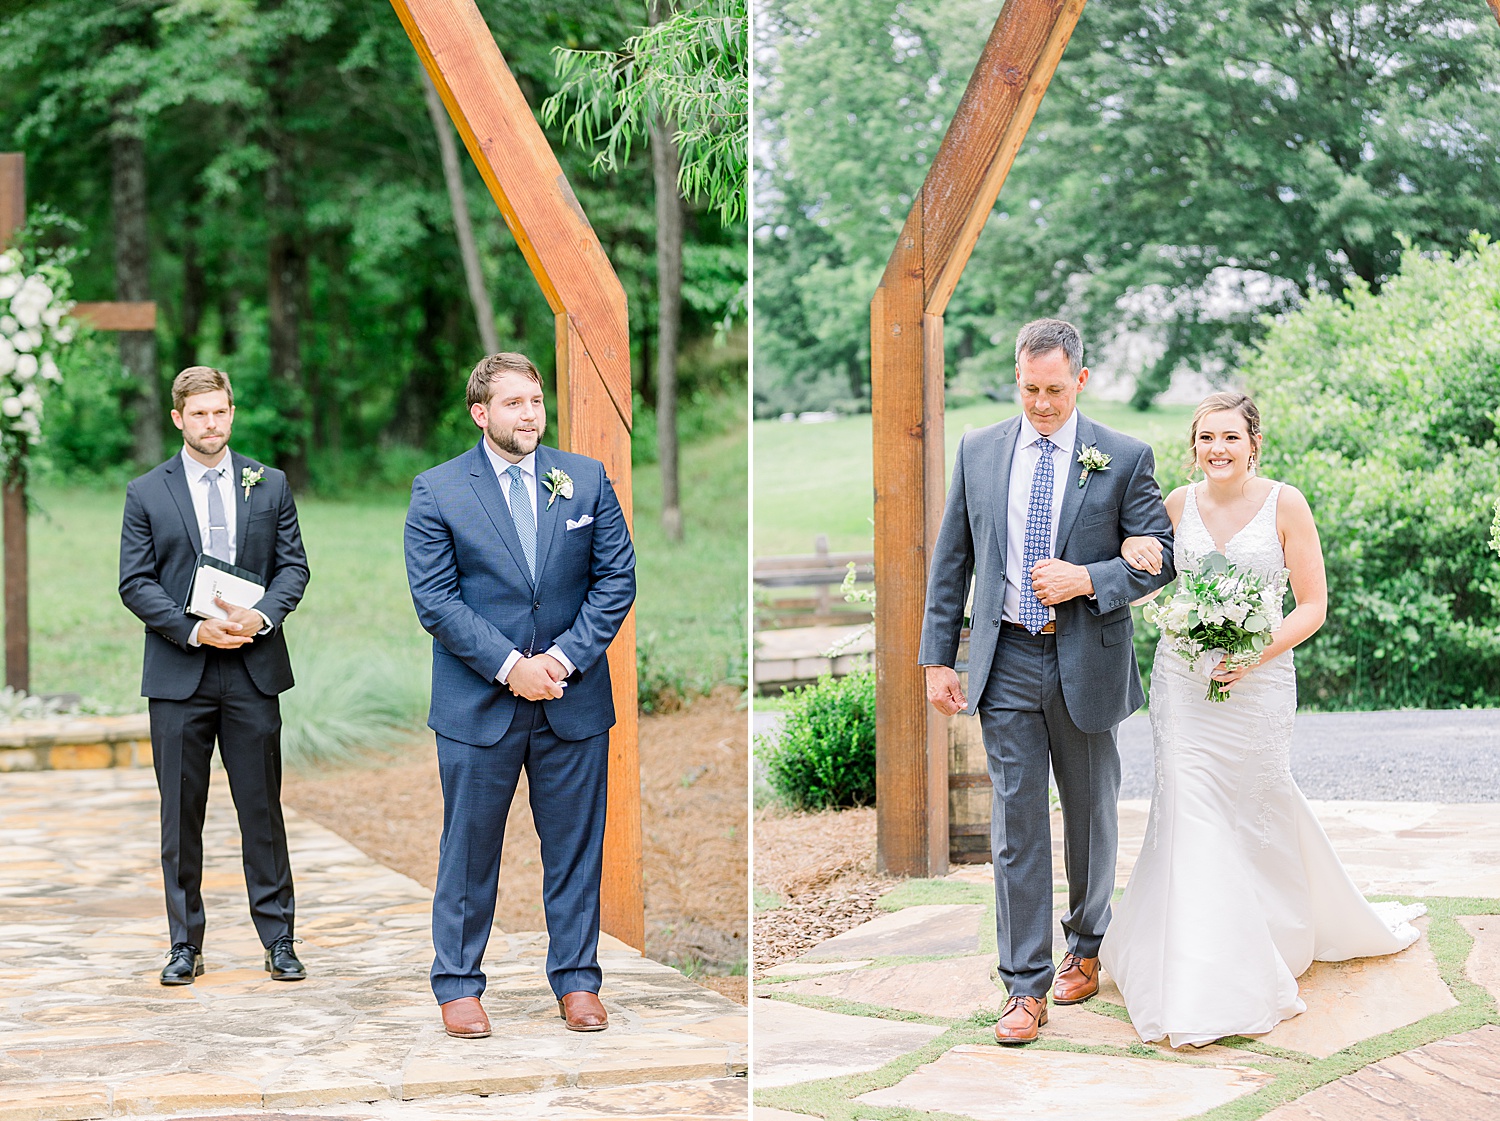 Father-of-the-bride and daughter walk into ceremony towards future husband